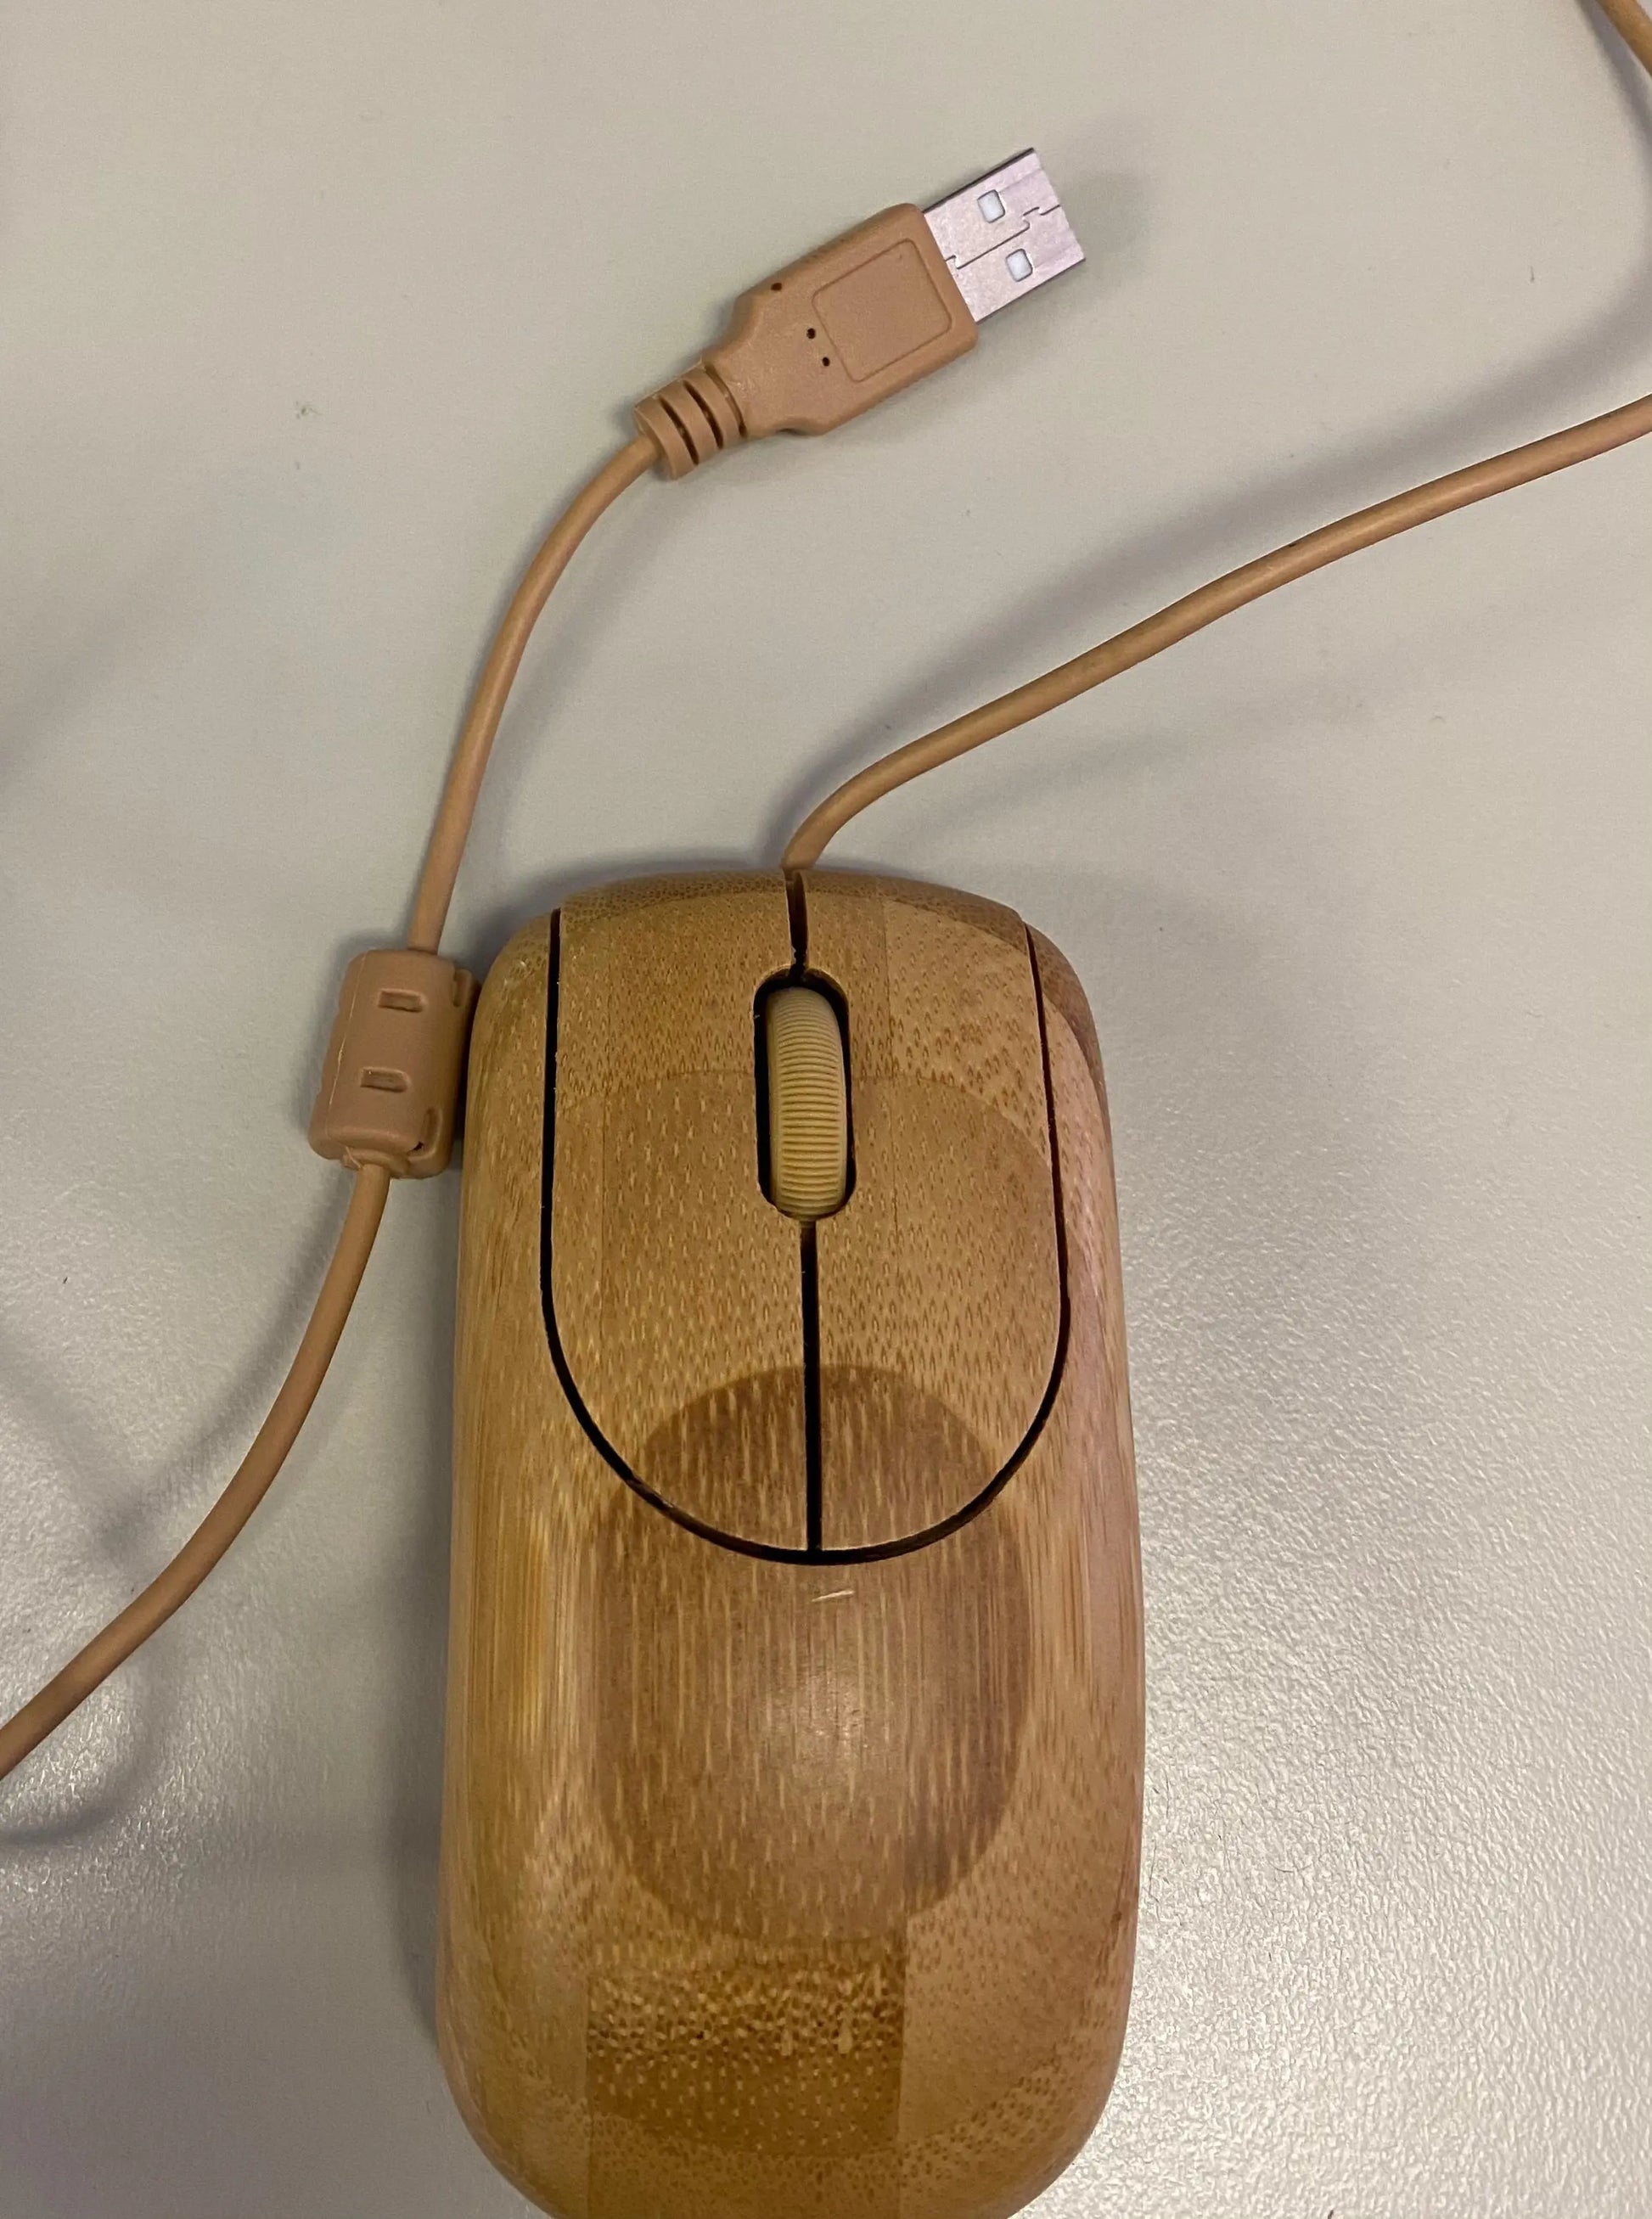 Wired Multimedia Bamboo Mouse Healthy Eco Friendly Fashionable fashion unique everythingbamboo